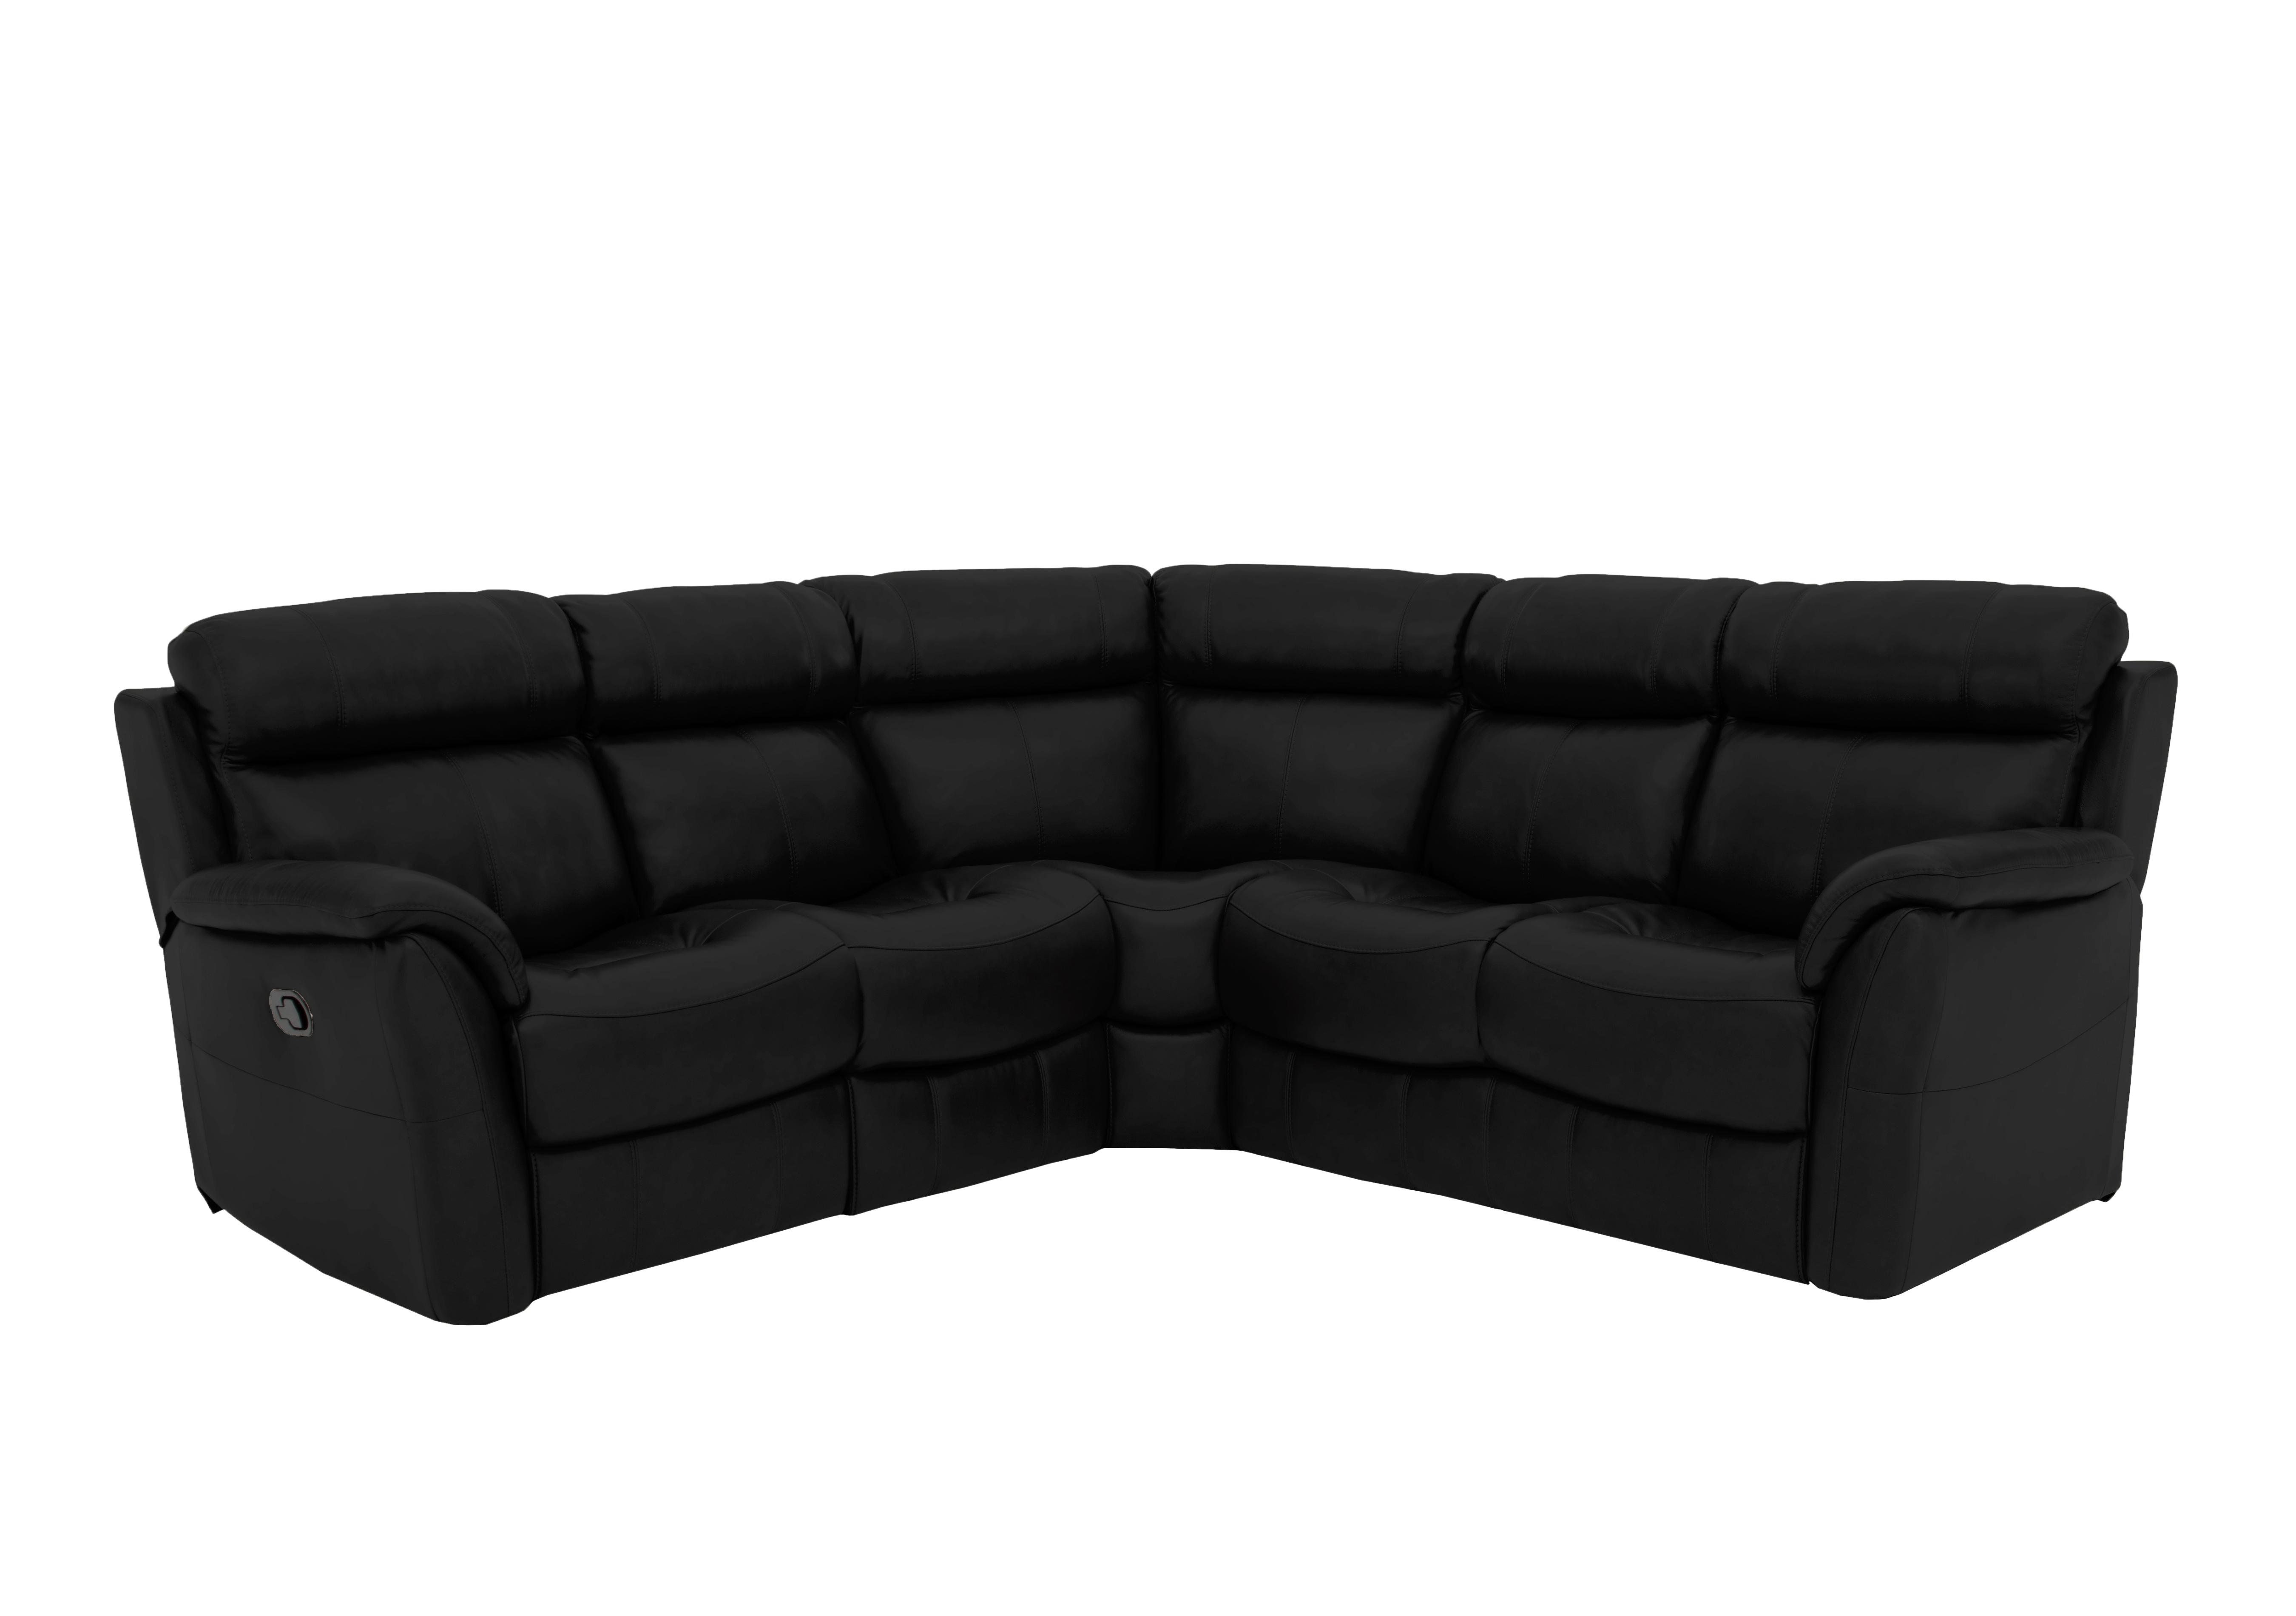 Relax Station Revive Leather Corner Sofa in Bv-3500 Classic Black on Furniture Village